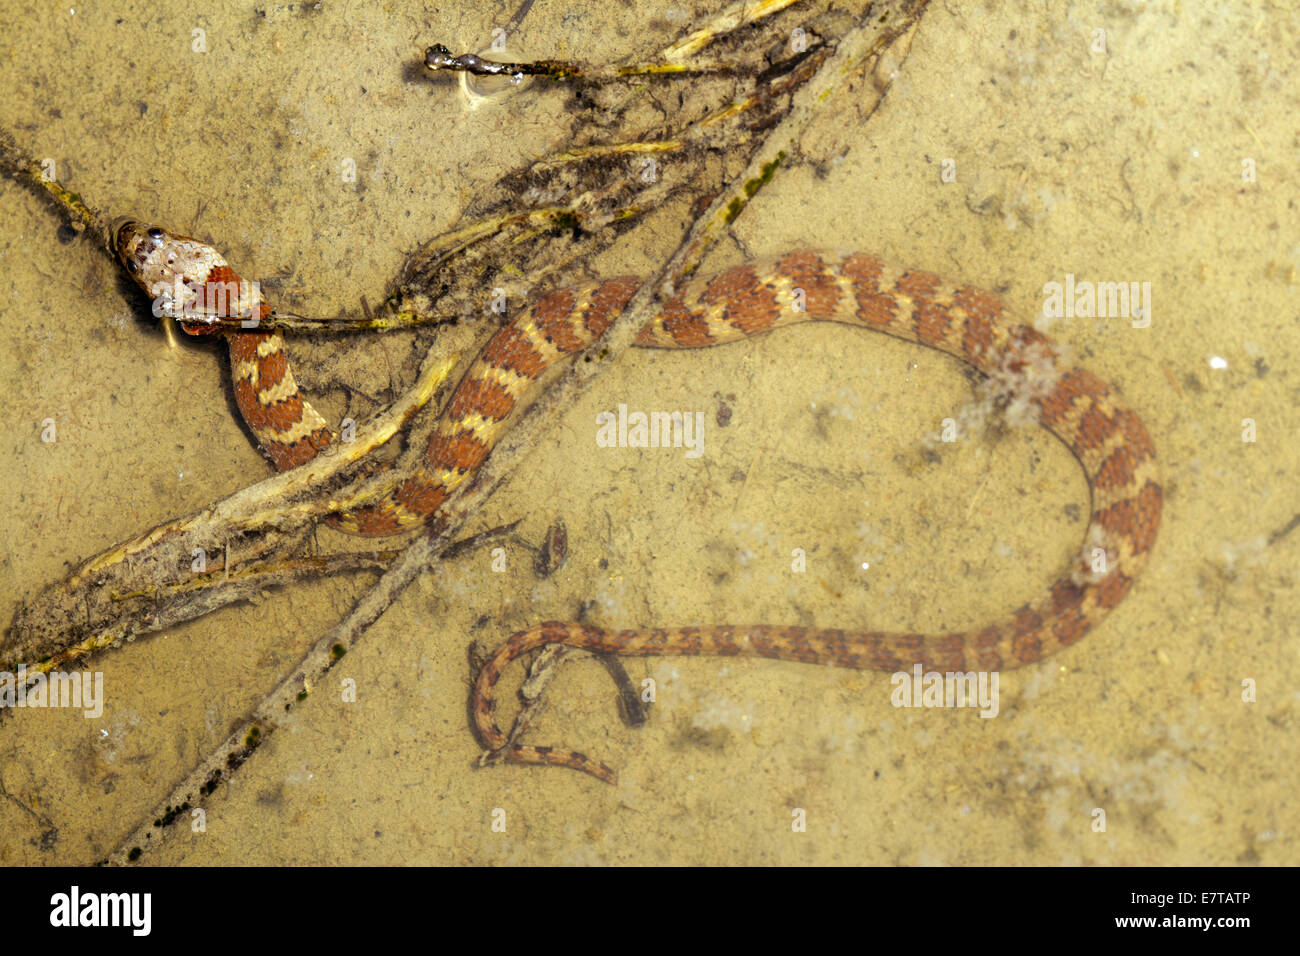 South American Water Snake (Helicops angulatus) in a pool on the rainforest floor, Ecuador Stock Photo